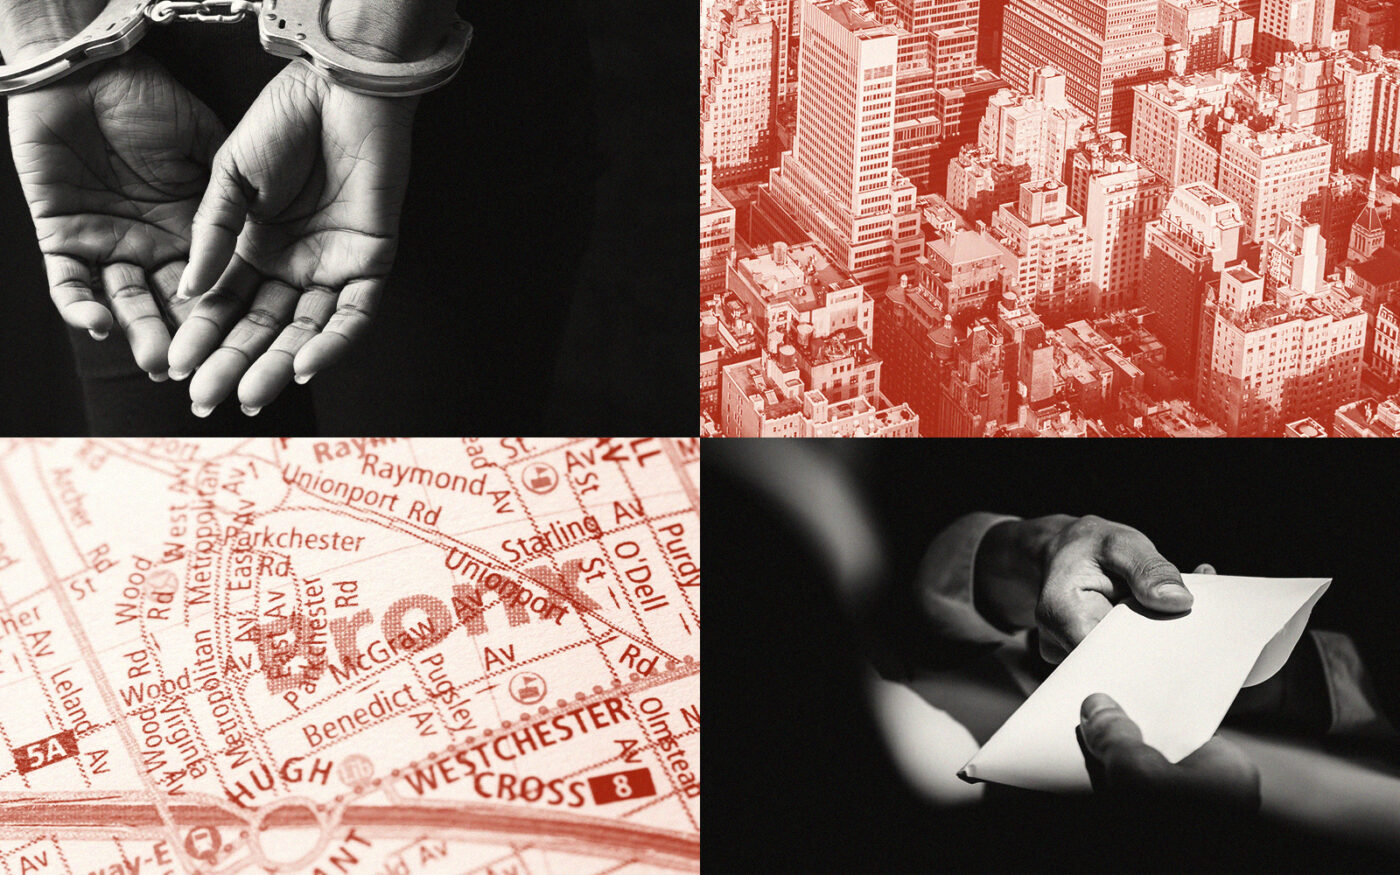 Handcuffed hands; New York City, map of the Bronx, hands exchanging paper